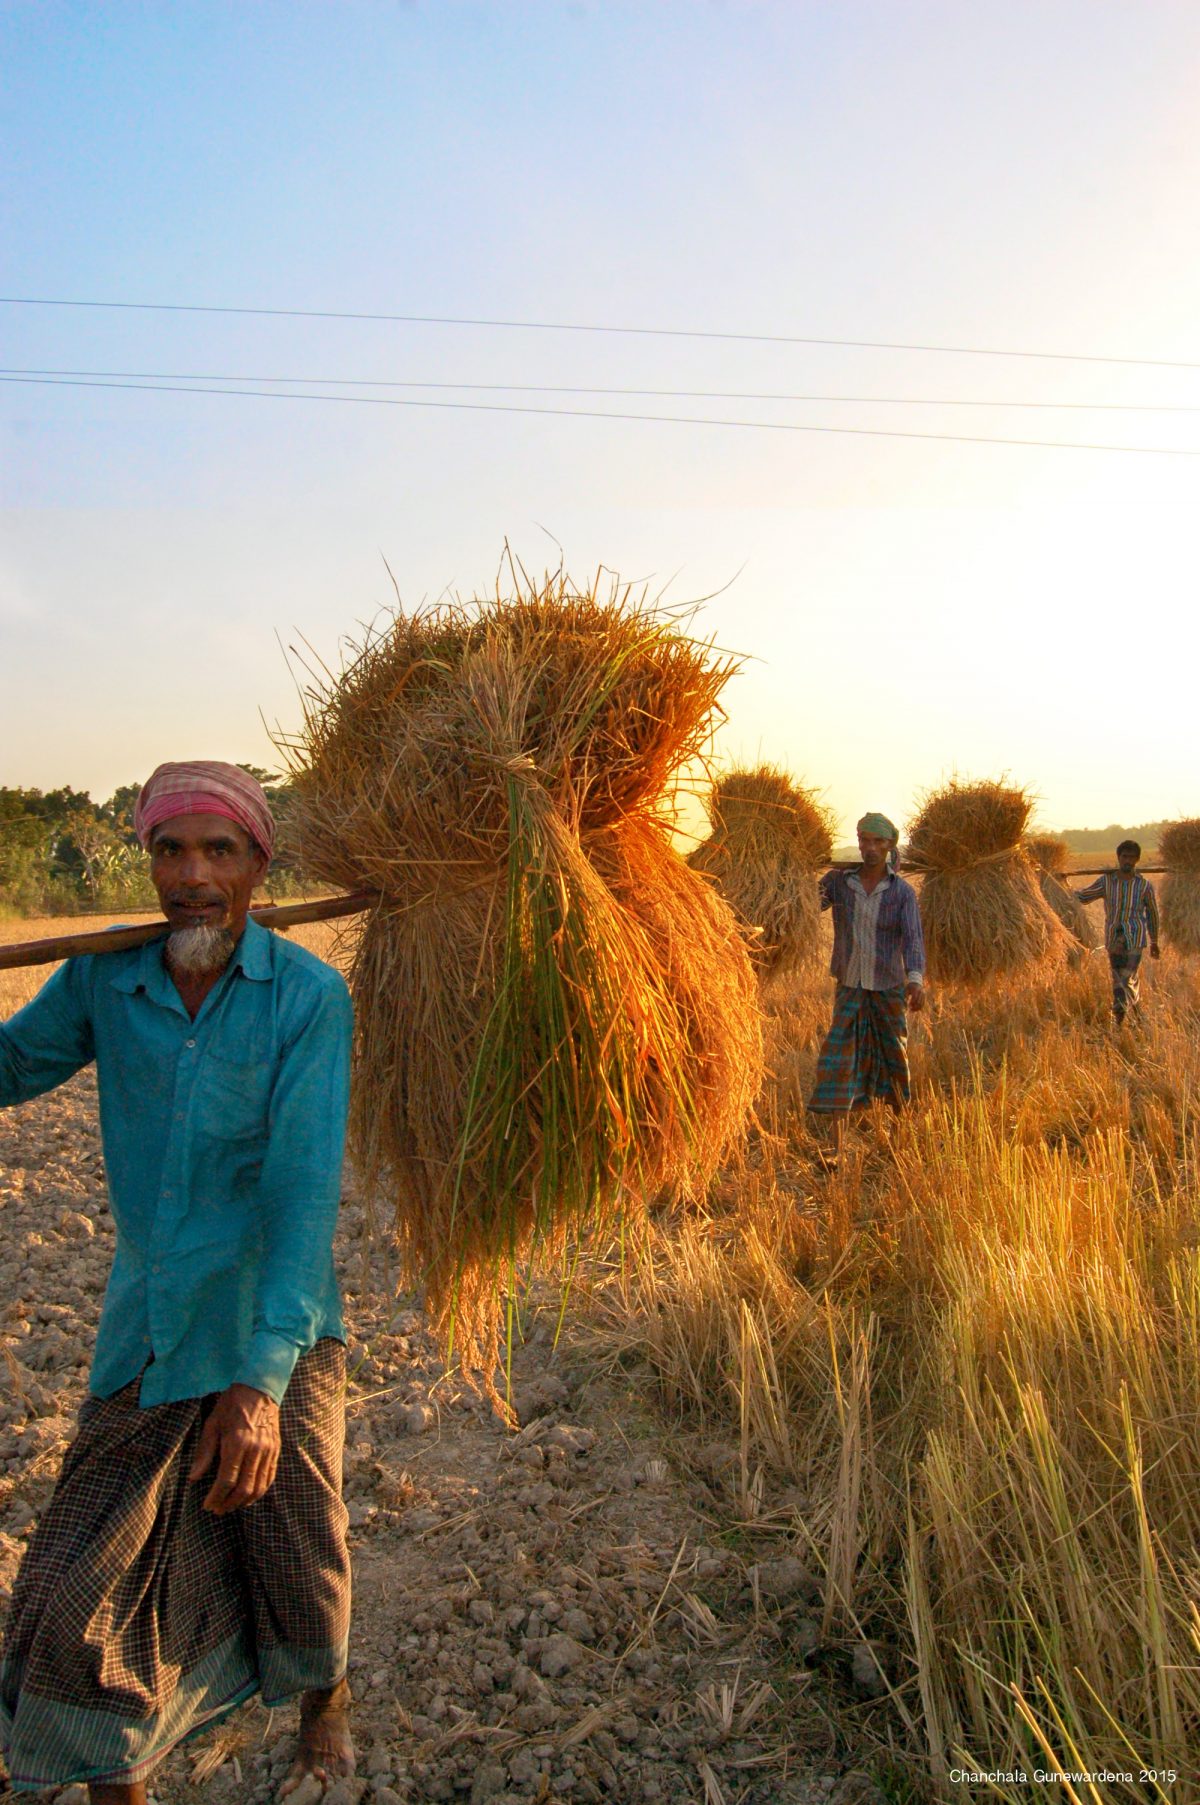 The Harvest of Sonar Bangla: Golden Bengal comes to life as a rich harvest is brought in at sunset in Roazan, Chittagong. Around 48% percent* of Bangladeshis are employed in the agriculture sector. *World Bank & CIA Factbook Data 2016